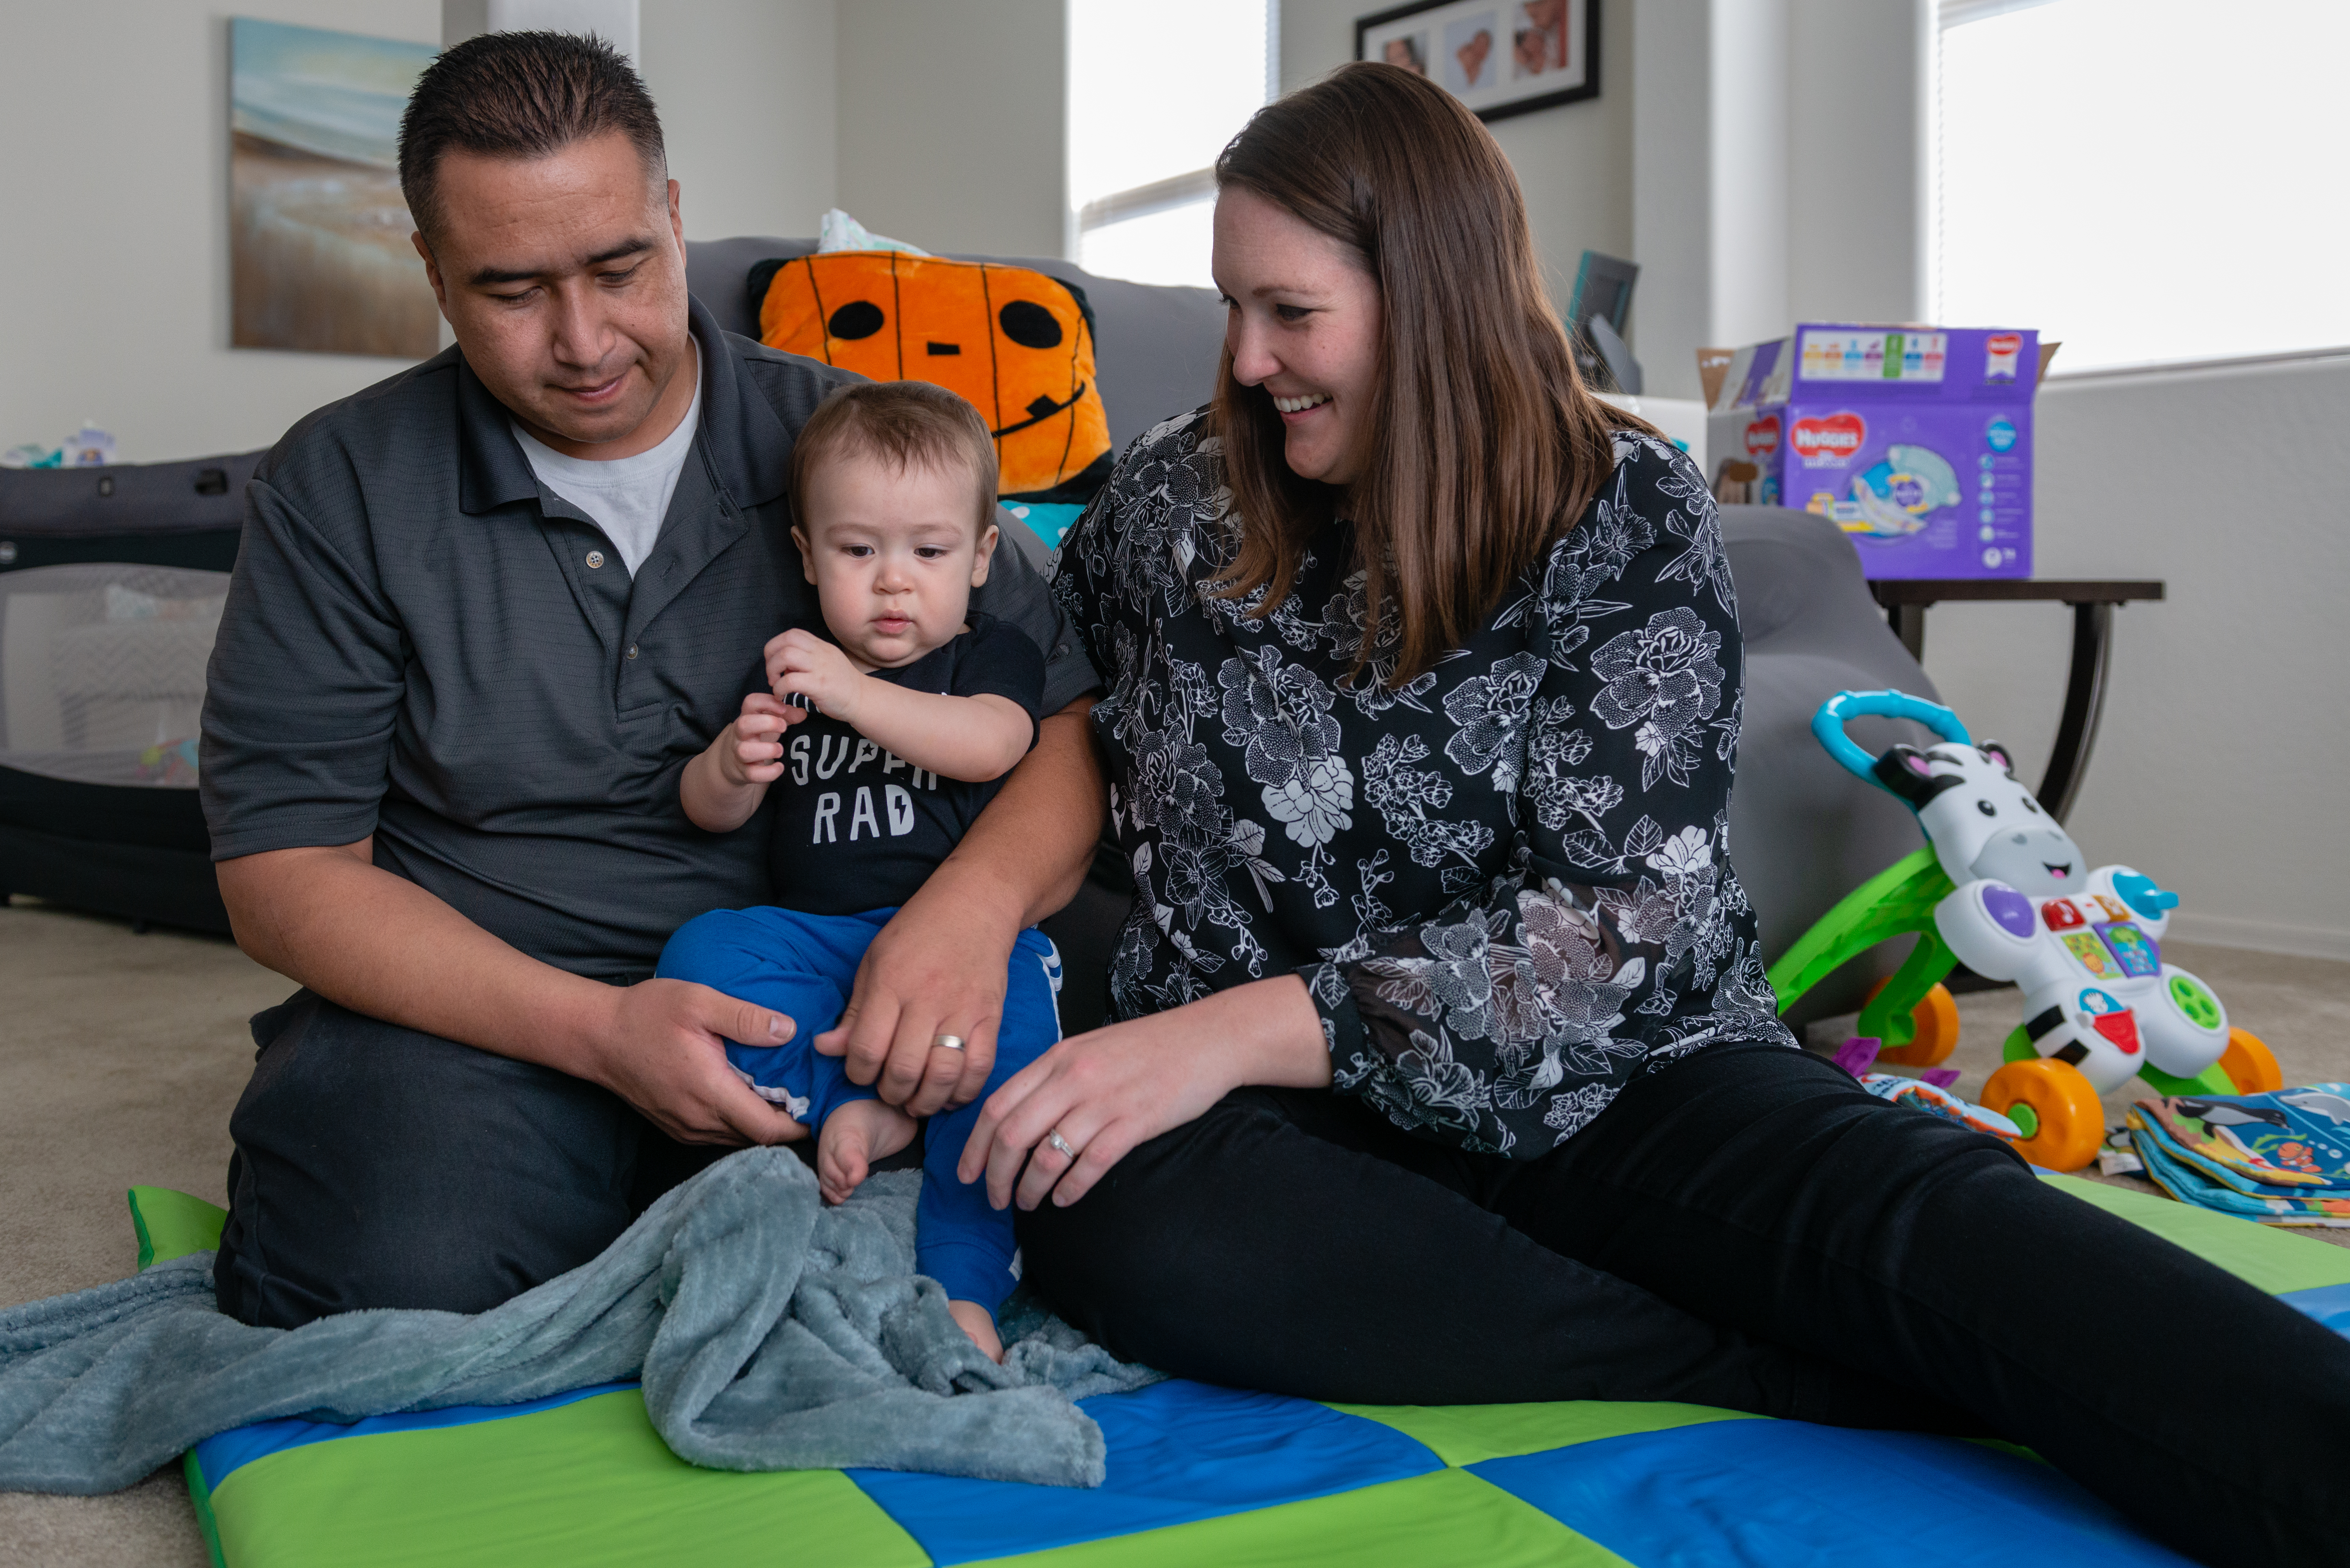 This Couple Works 5 Jobs and Makes $100,000 a Year — and Still Can’t Afford Medical Bills for Their Child